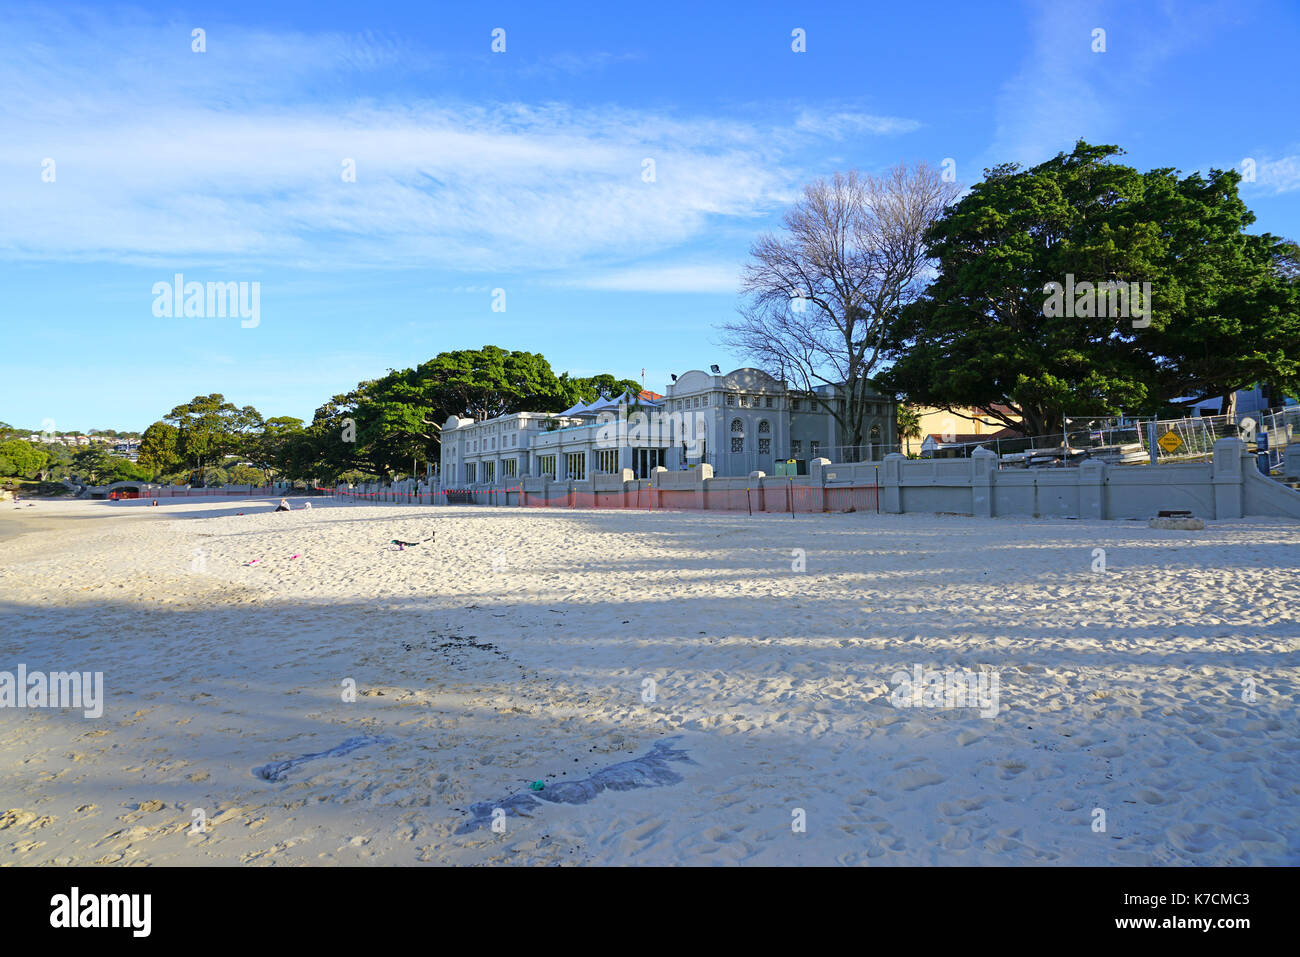 View of the Balmoral Beach in Mosman, Sydney, New South Wales, Australia. Stock Photo